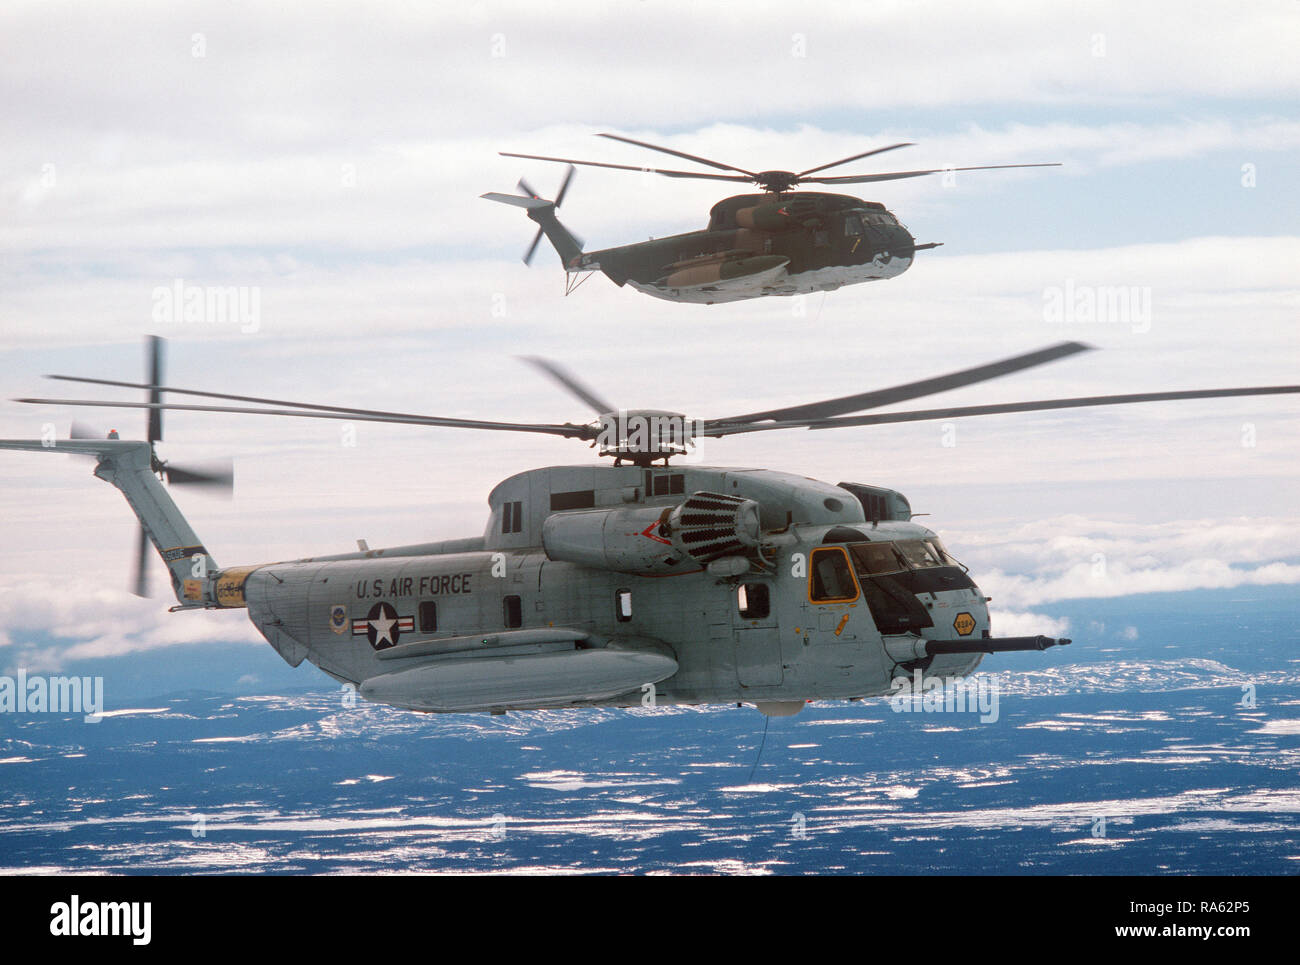 1978 - An air-to-air right side view of two 39th Aerospace Rescue and Recovery Wing HH-53 helicopters over Goose Bay while en route from Eglin Air Force Base, Florida, to Woodbridge, England. Stock Photo